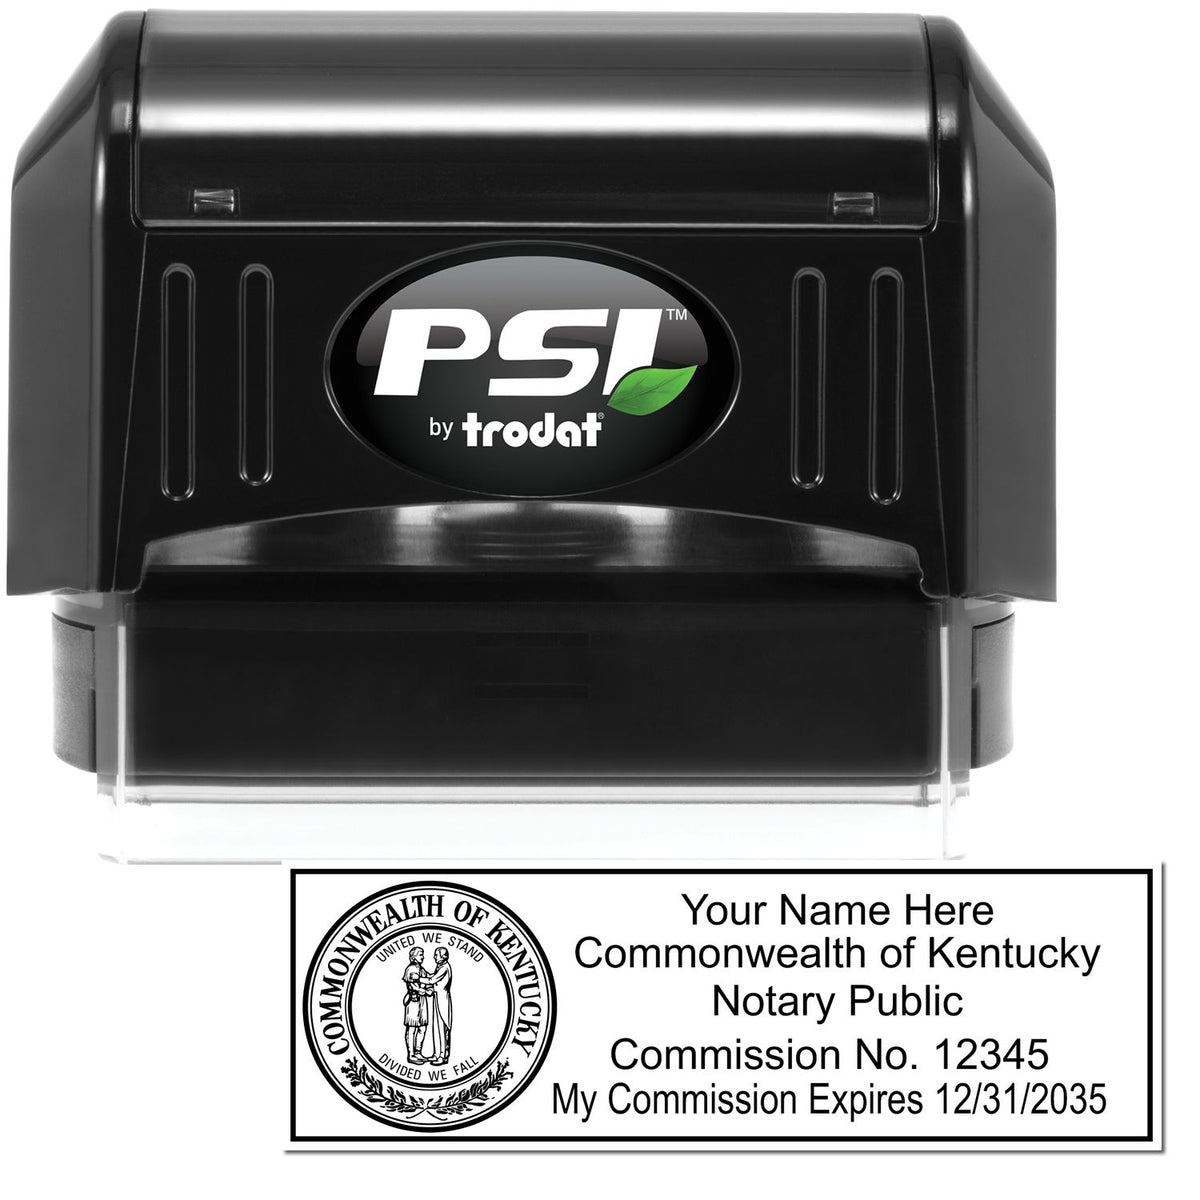 The main image for the PSI Kentucky Notary Stamp depicting a sample of the imprint and electronic files